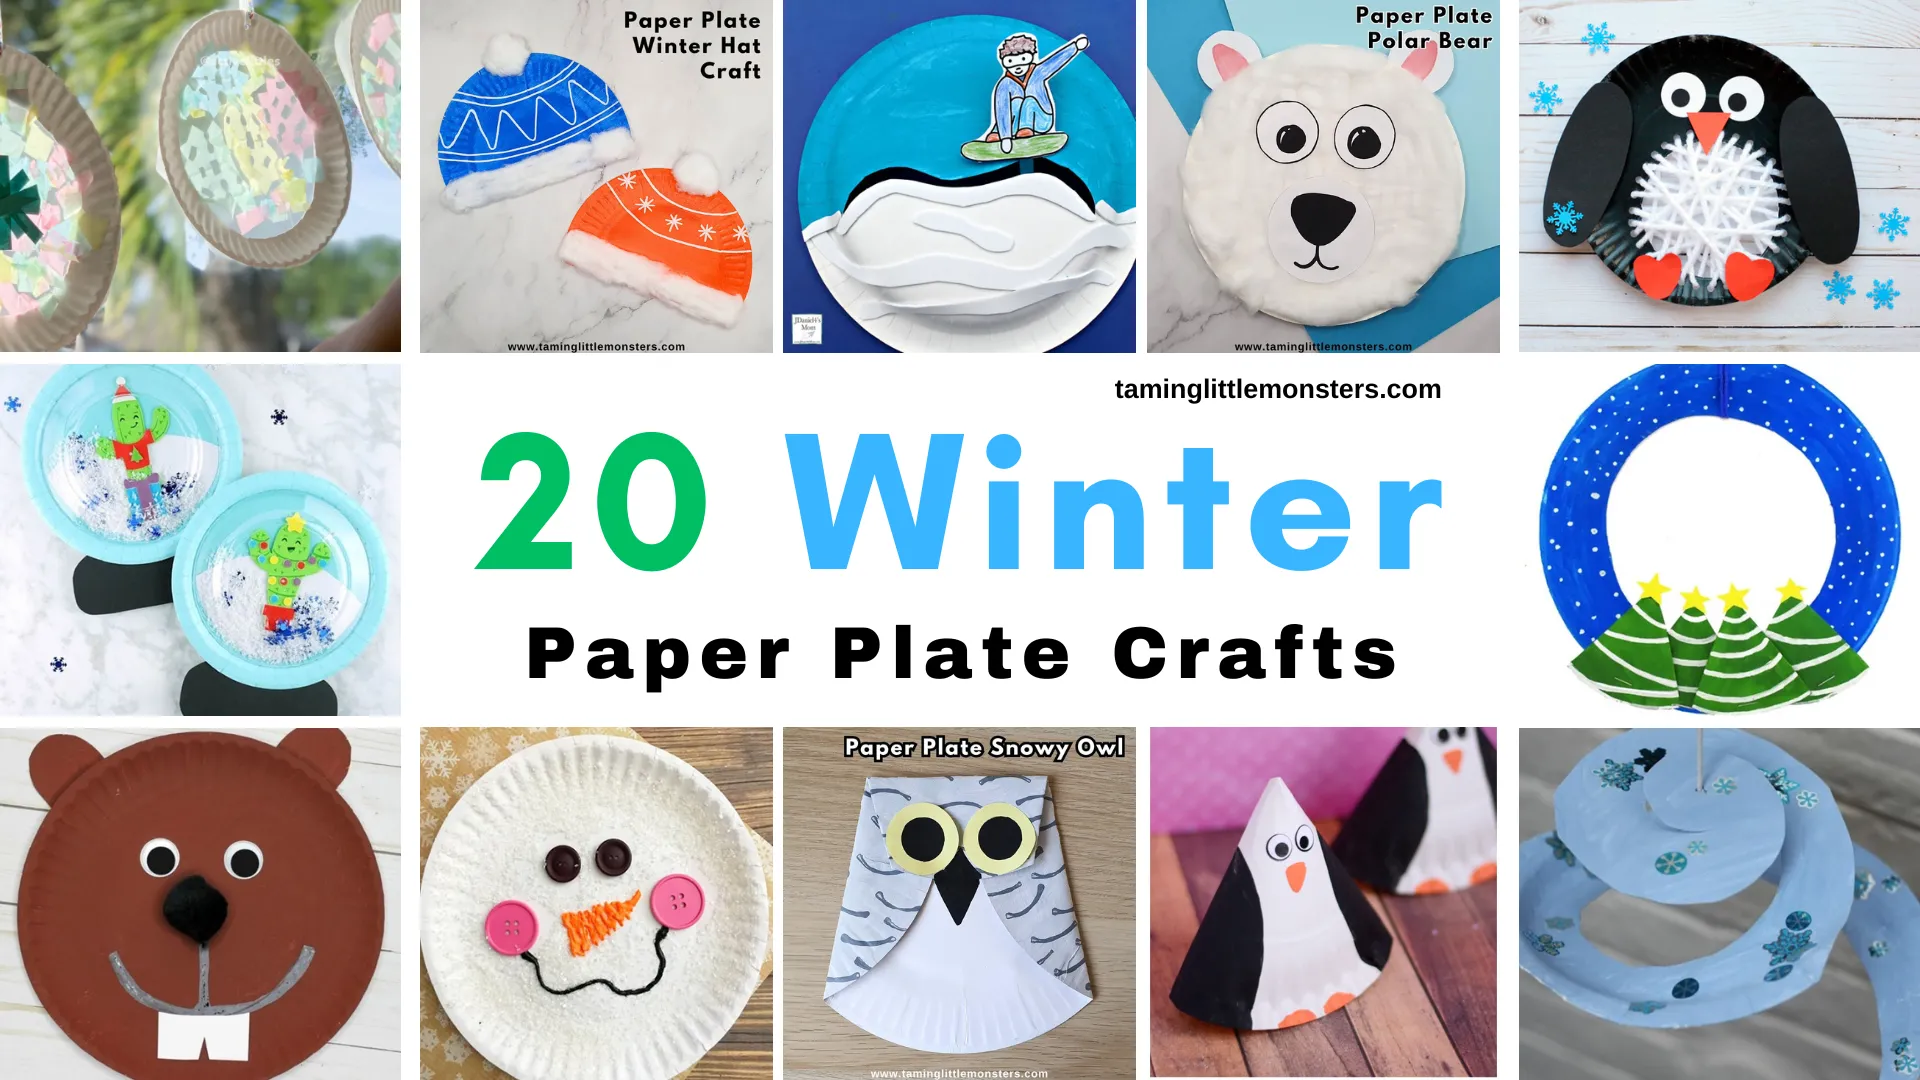 Popsicle Stick Arctic Animal Crafts - Messy Little Monster